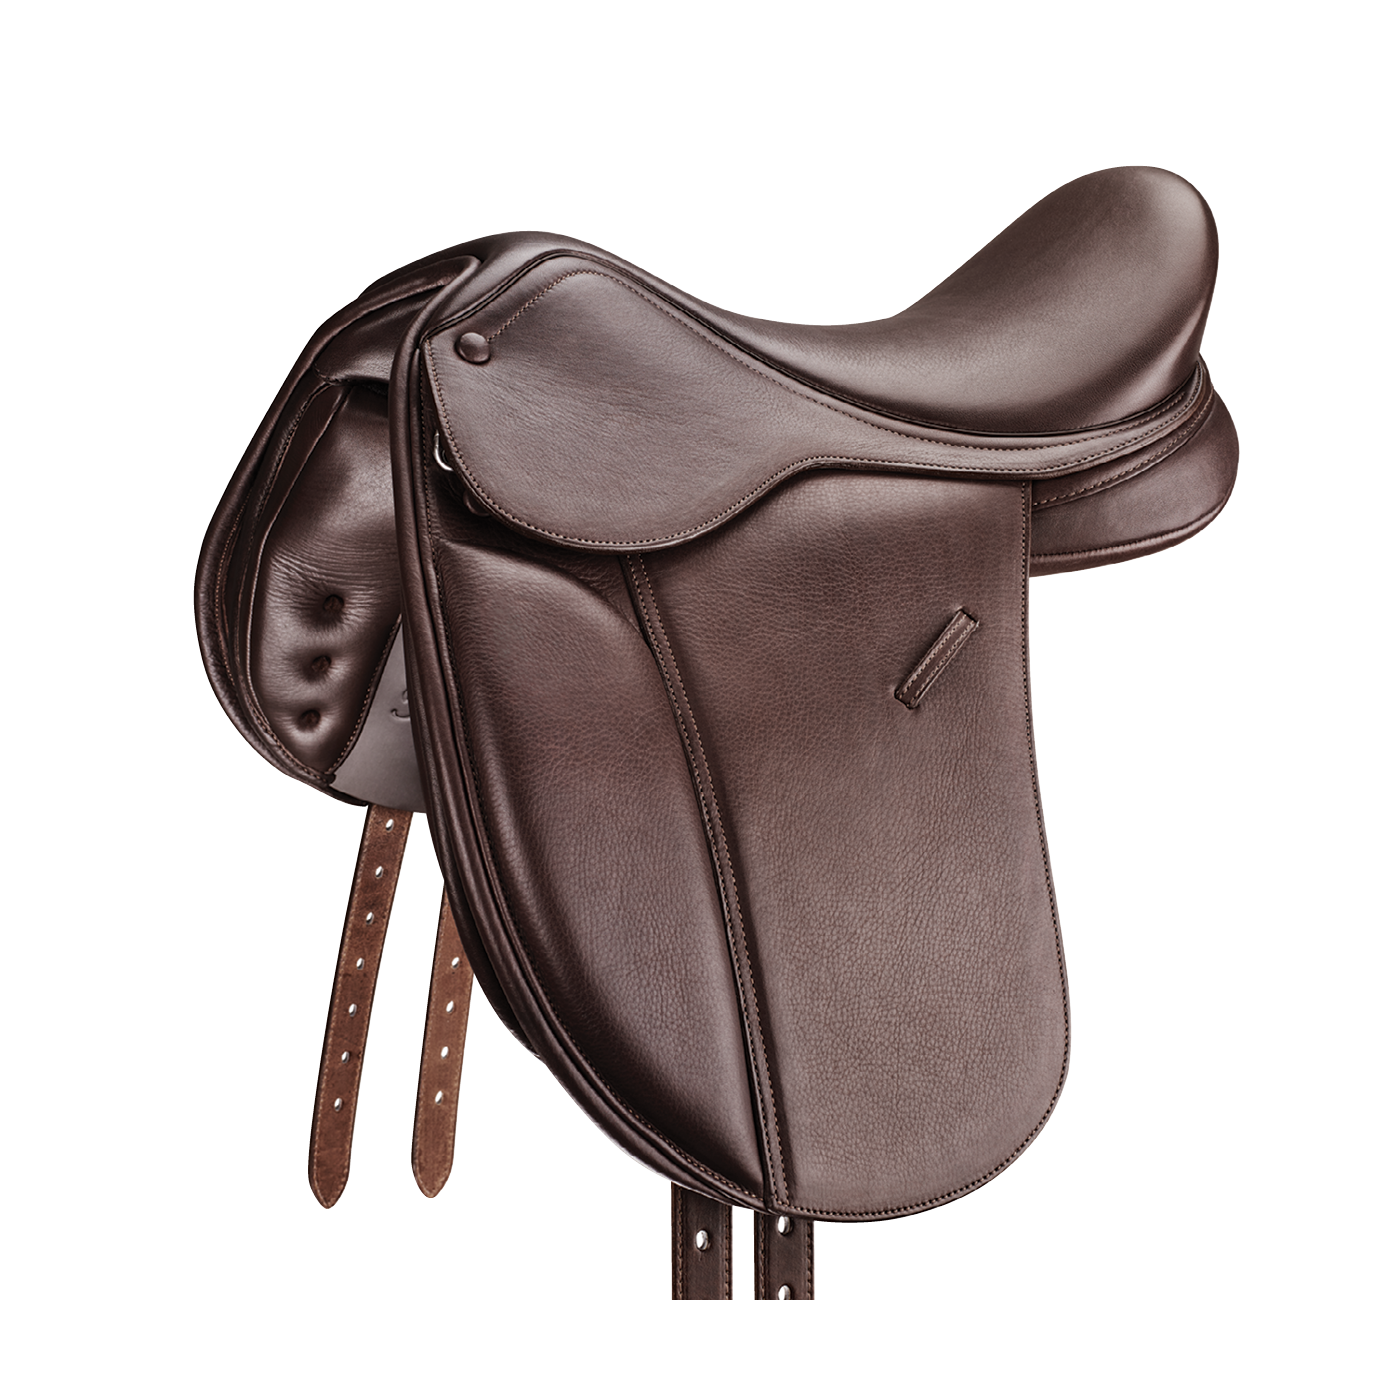 Bates Pony Show in Classic Brown Opulence Leather (DISPLAY MODEL)